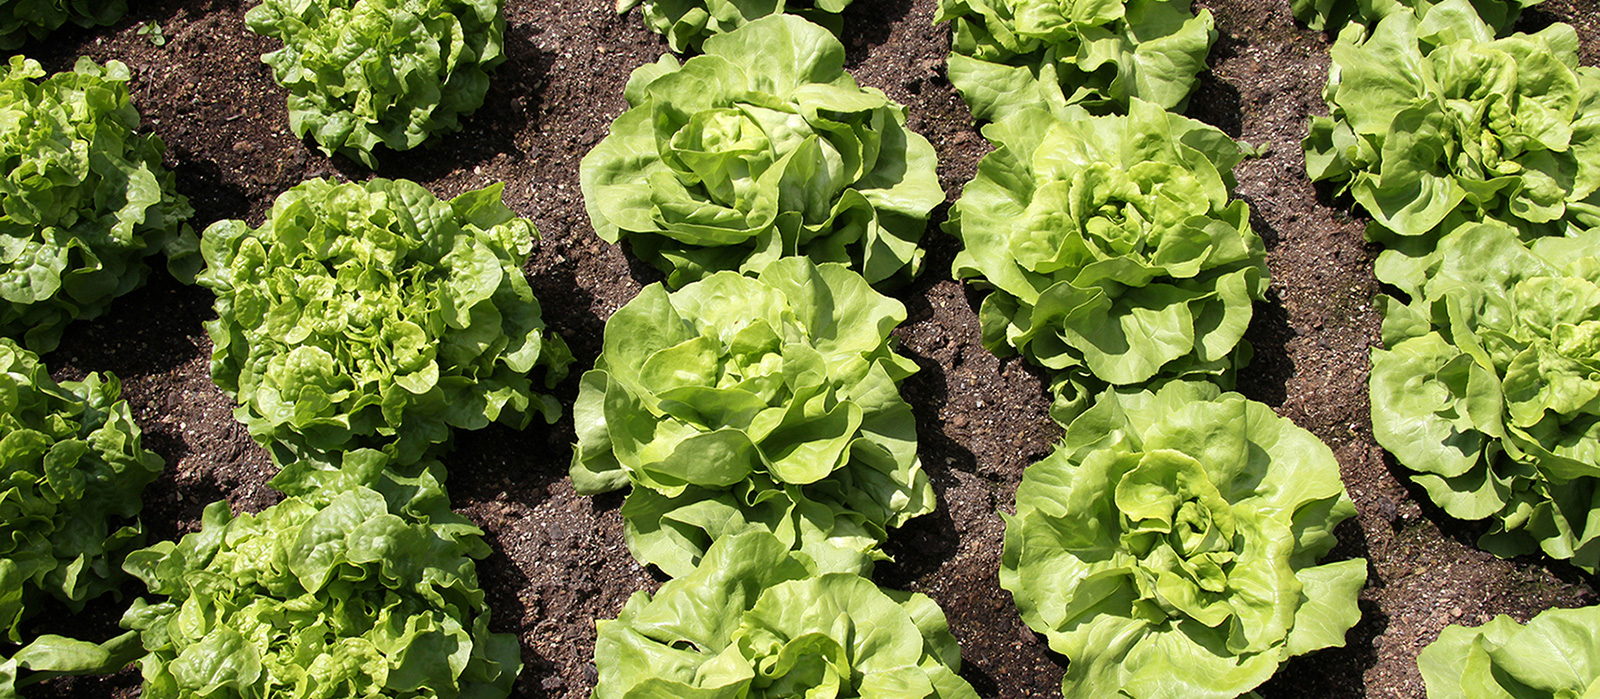 SPECIALTY PLANT NUTRITION: Potassium nitrate experience in lettuce